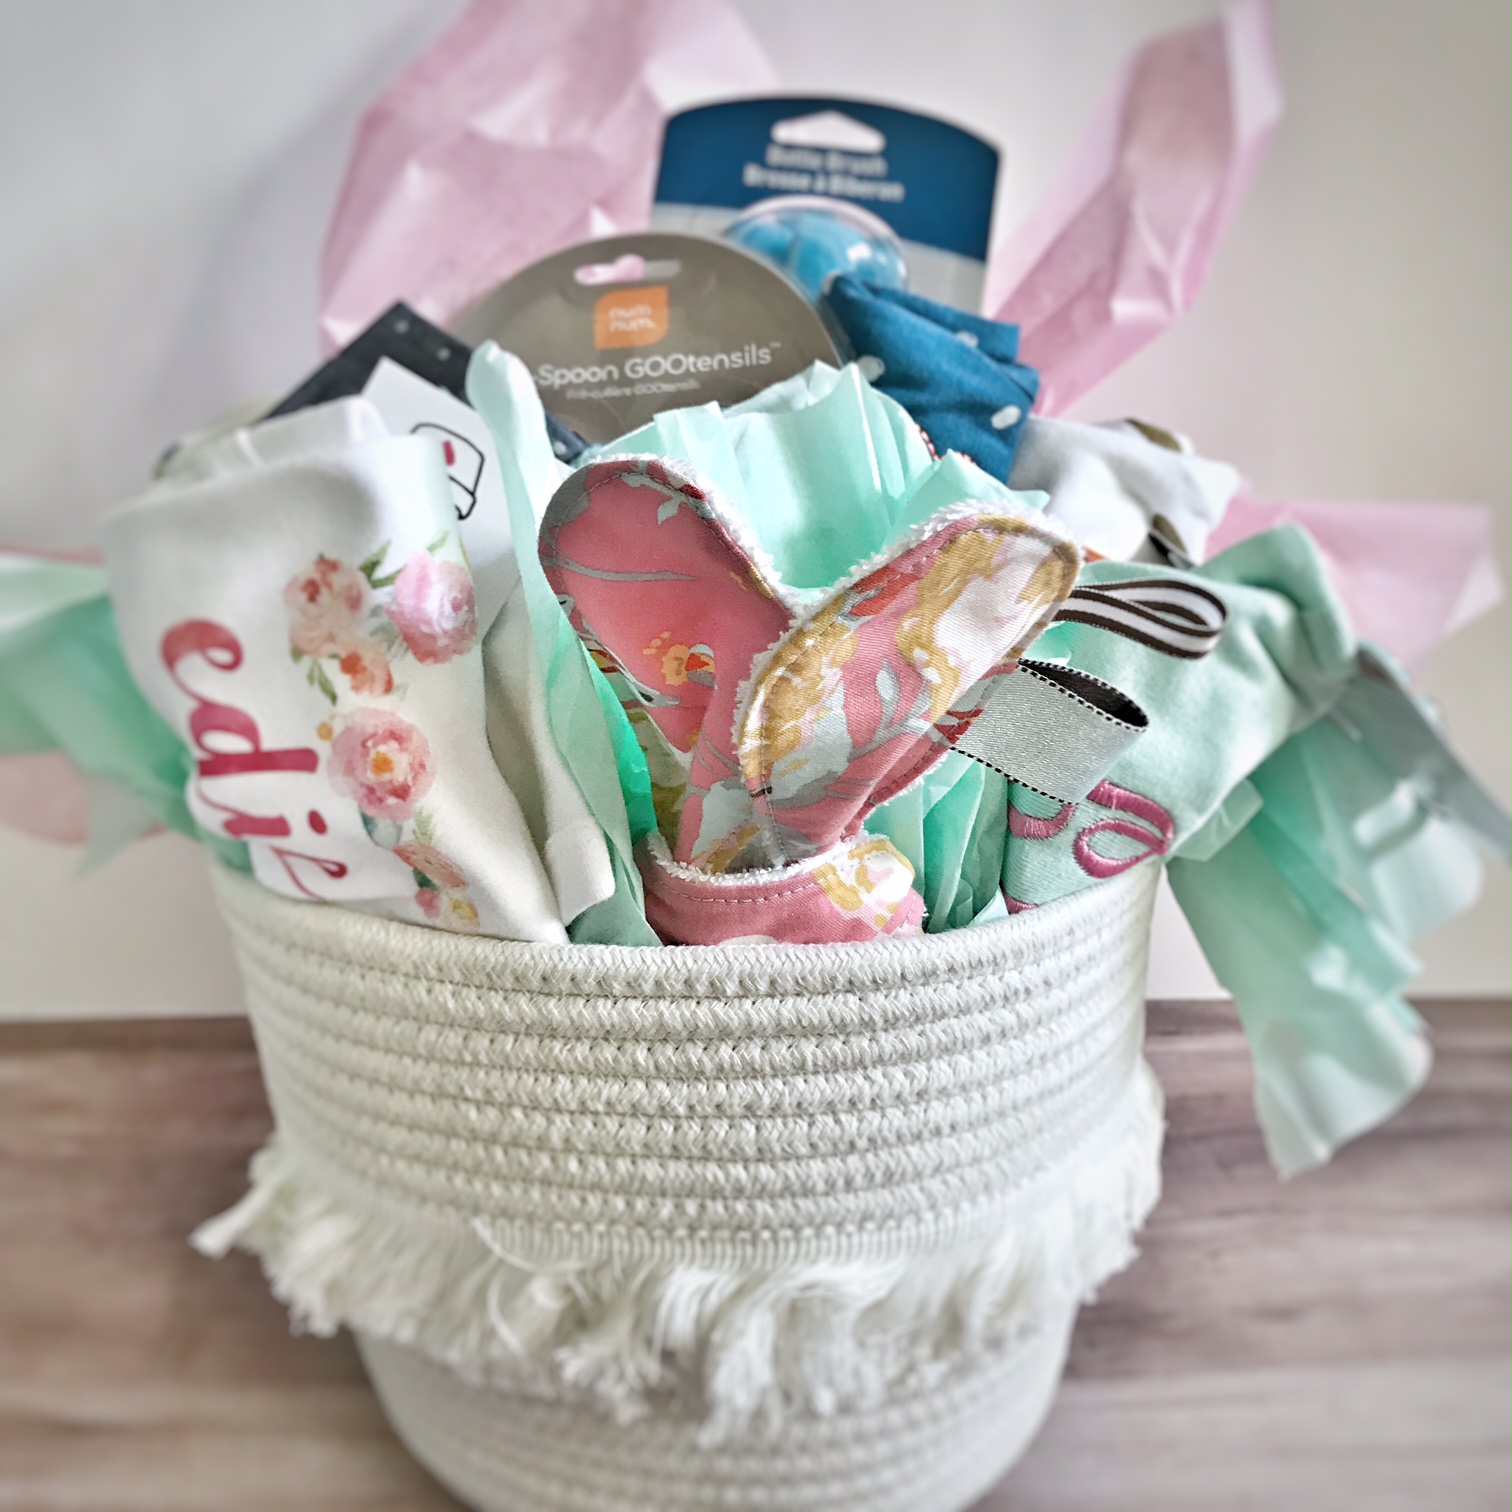 21 Sister, Mother, + Mother In Law Christmas Gifts - Chrissy Marie Blog